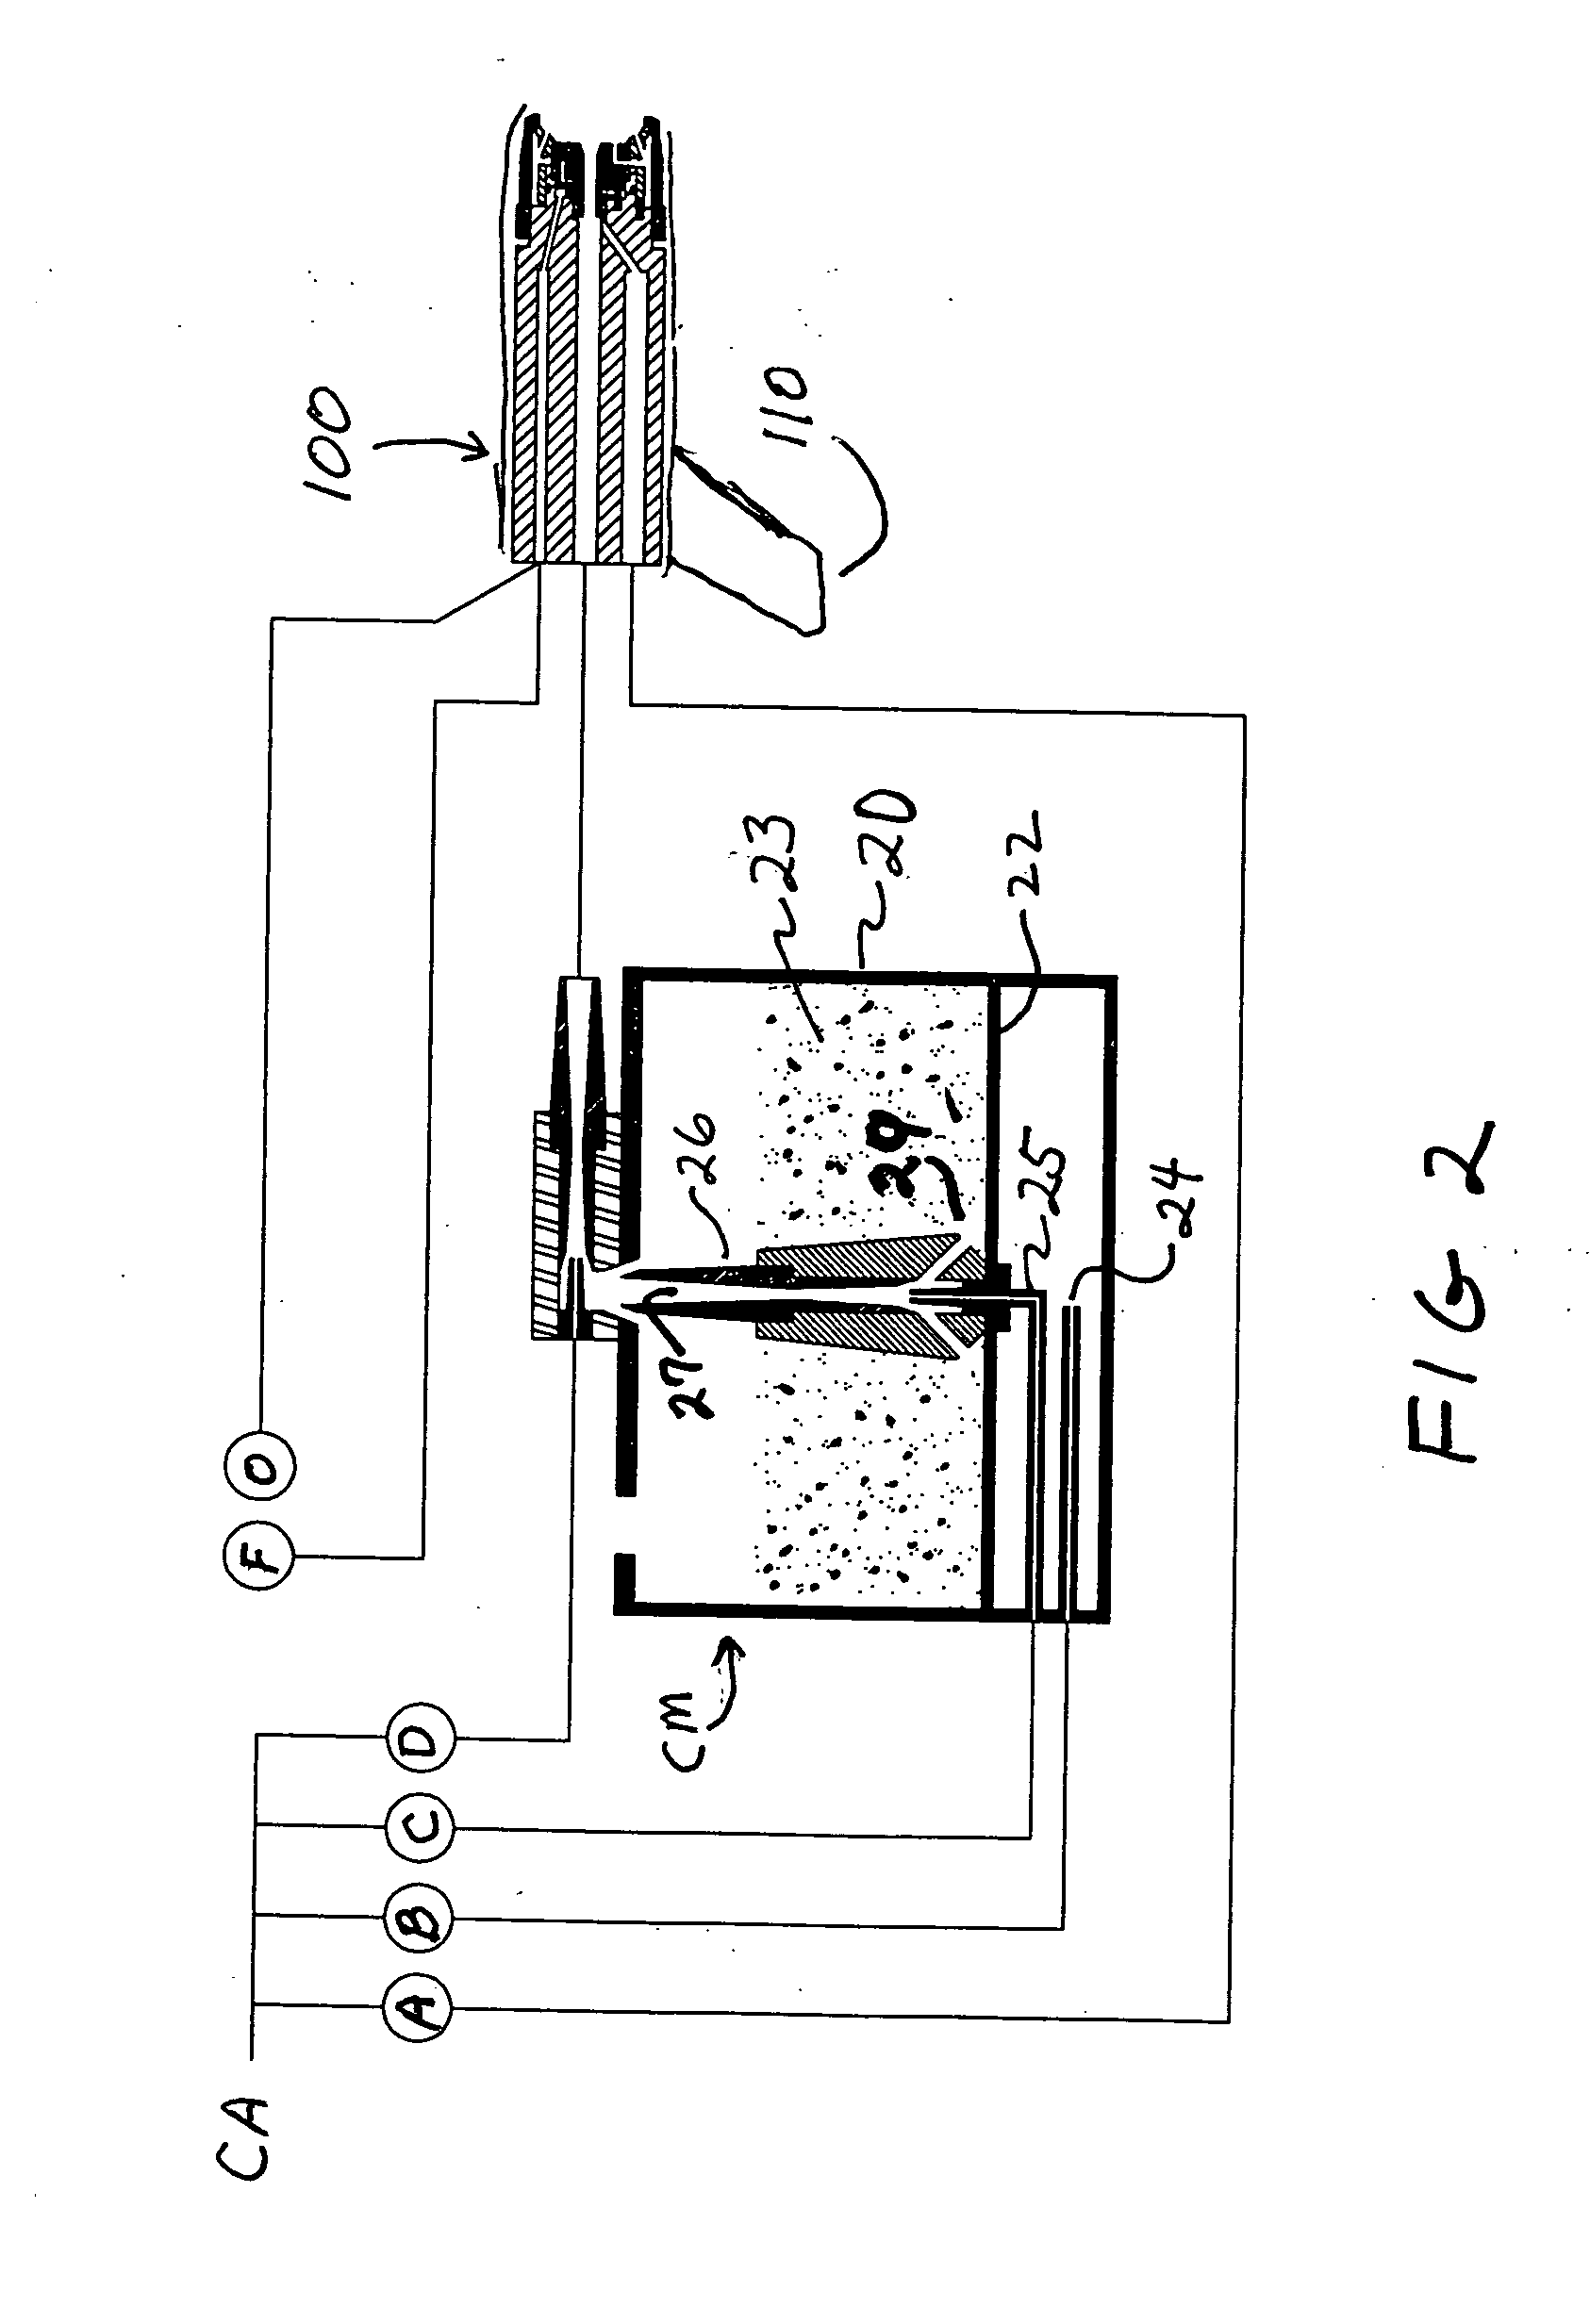 Apparatus for thermal spray coating